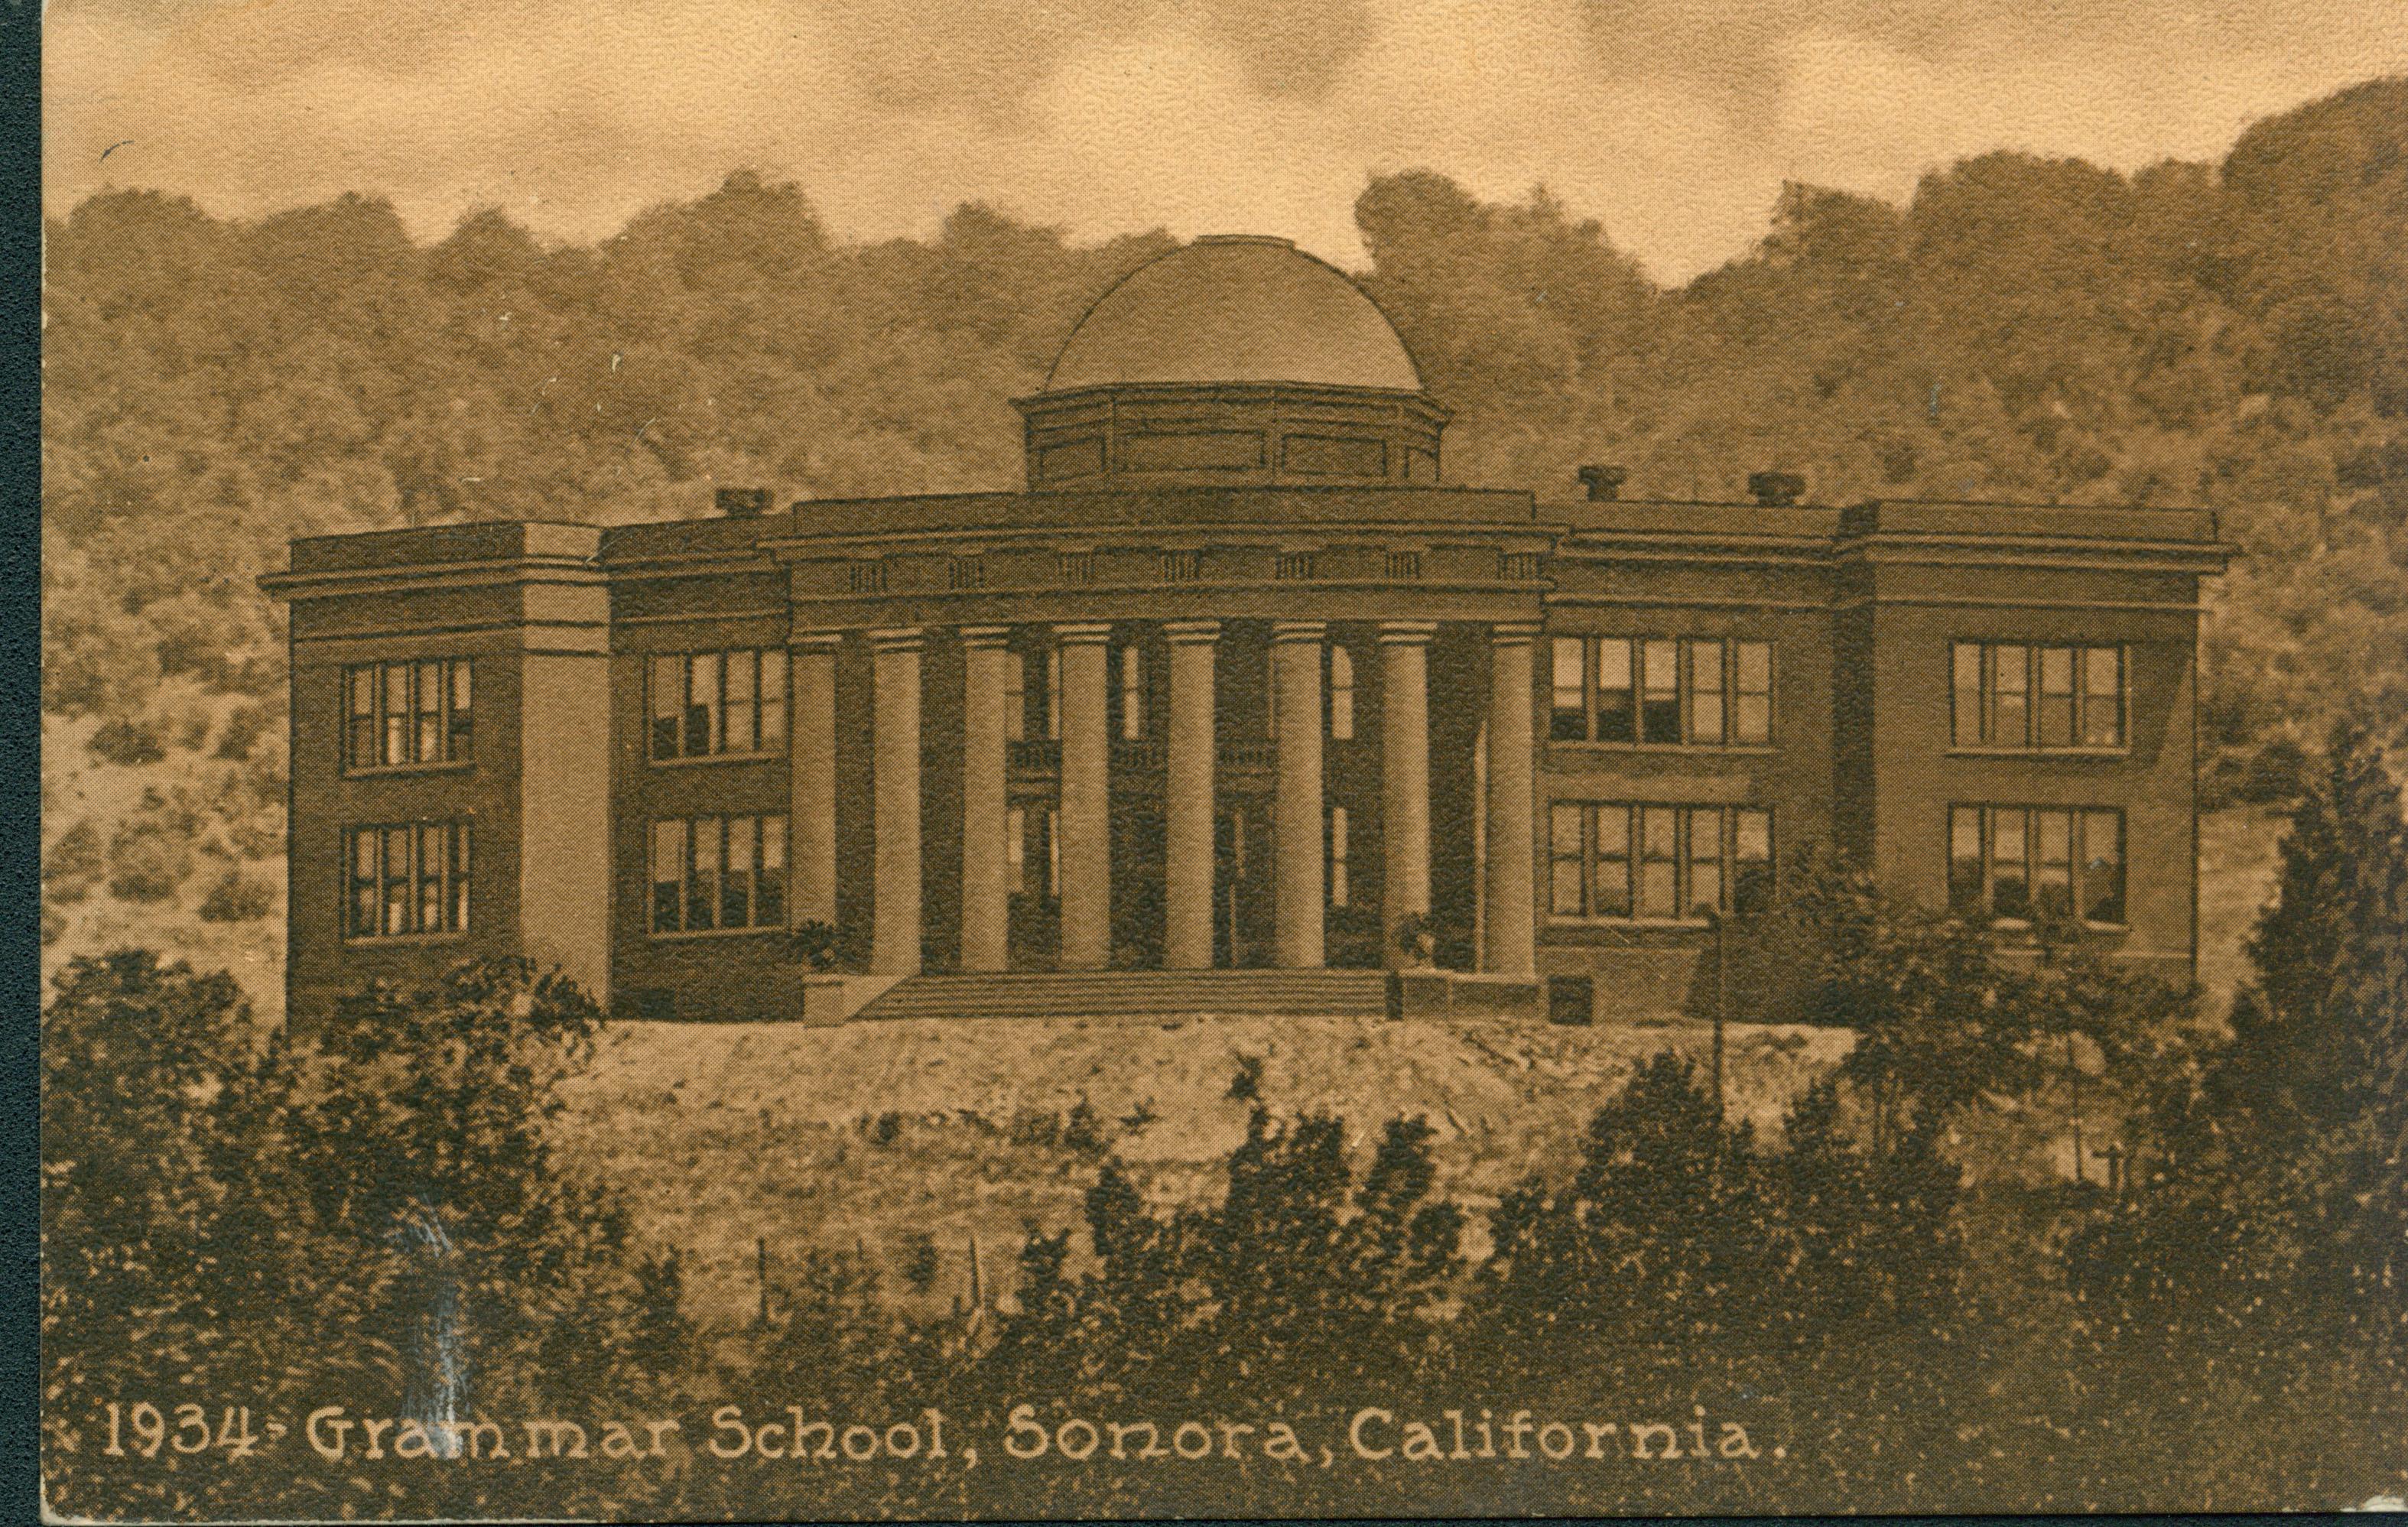 Shows the exterior of the elementary school in Sonora